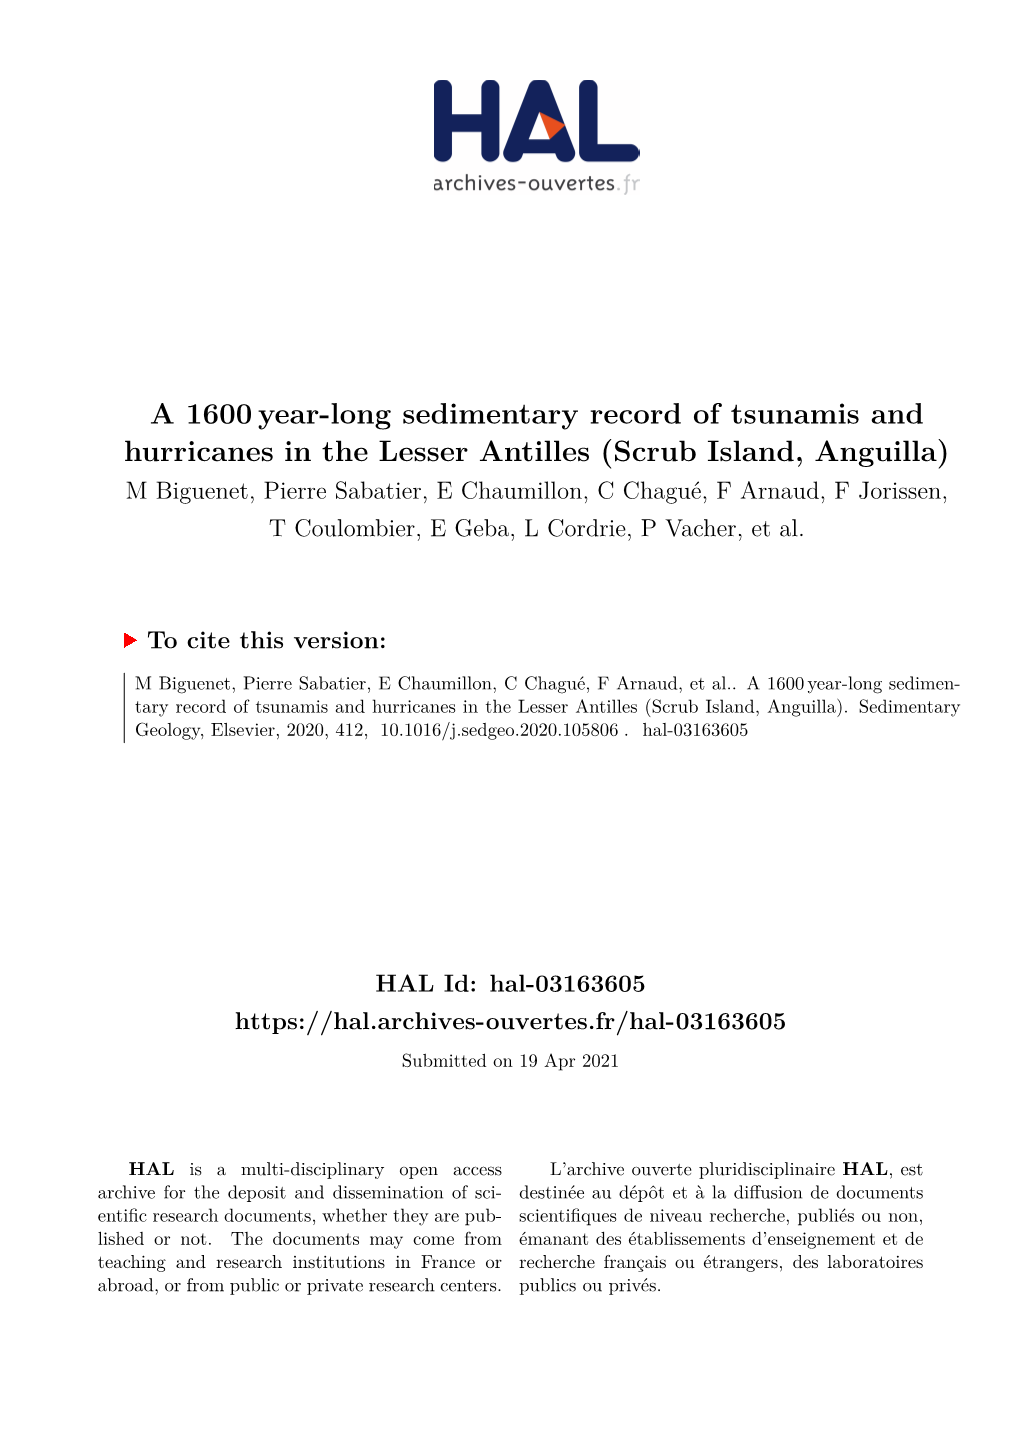 A 1600 Year-Long Sedimentary Record of Tsunamis and Hurricanes in The